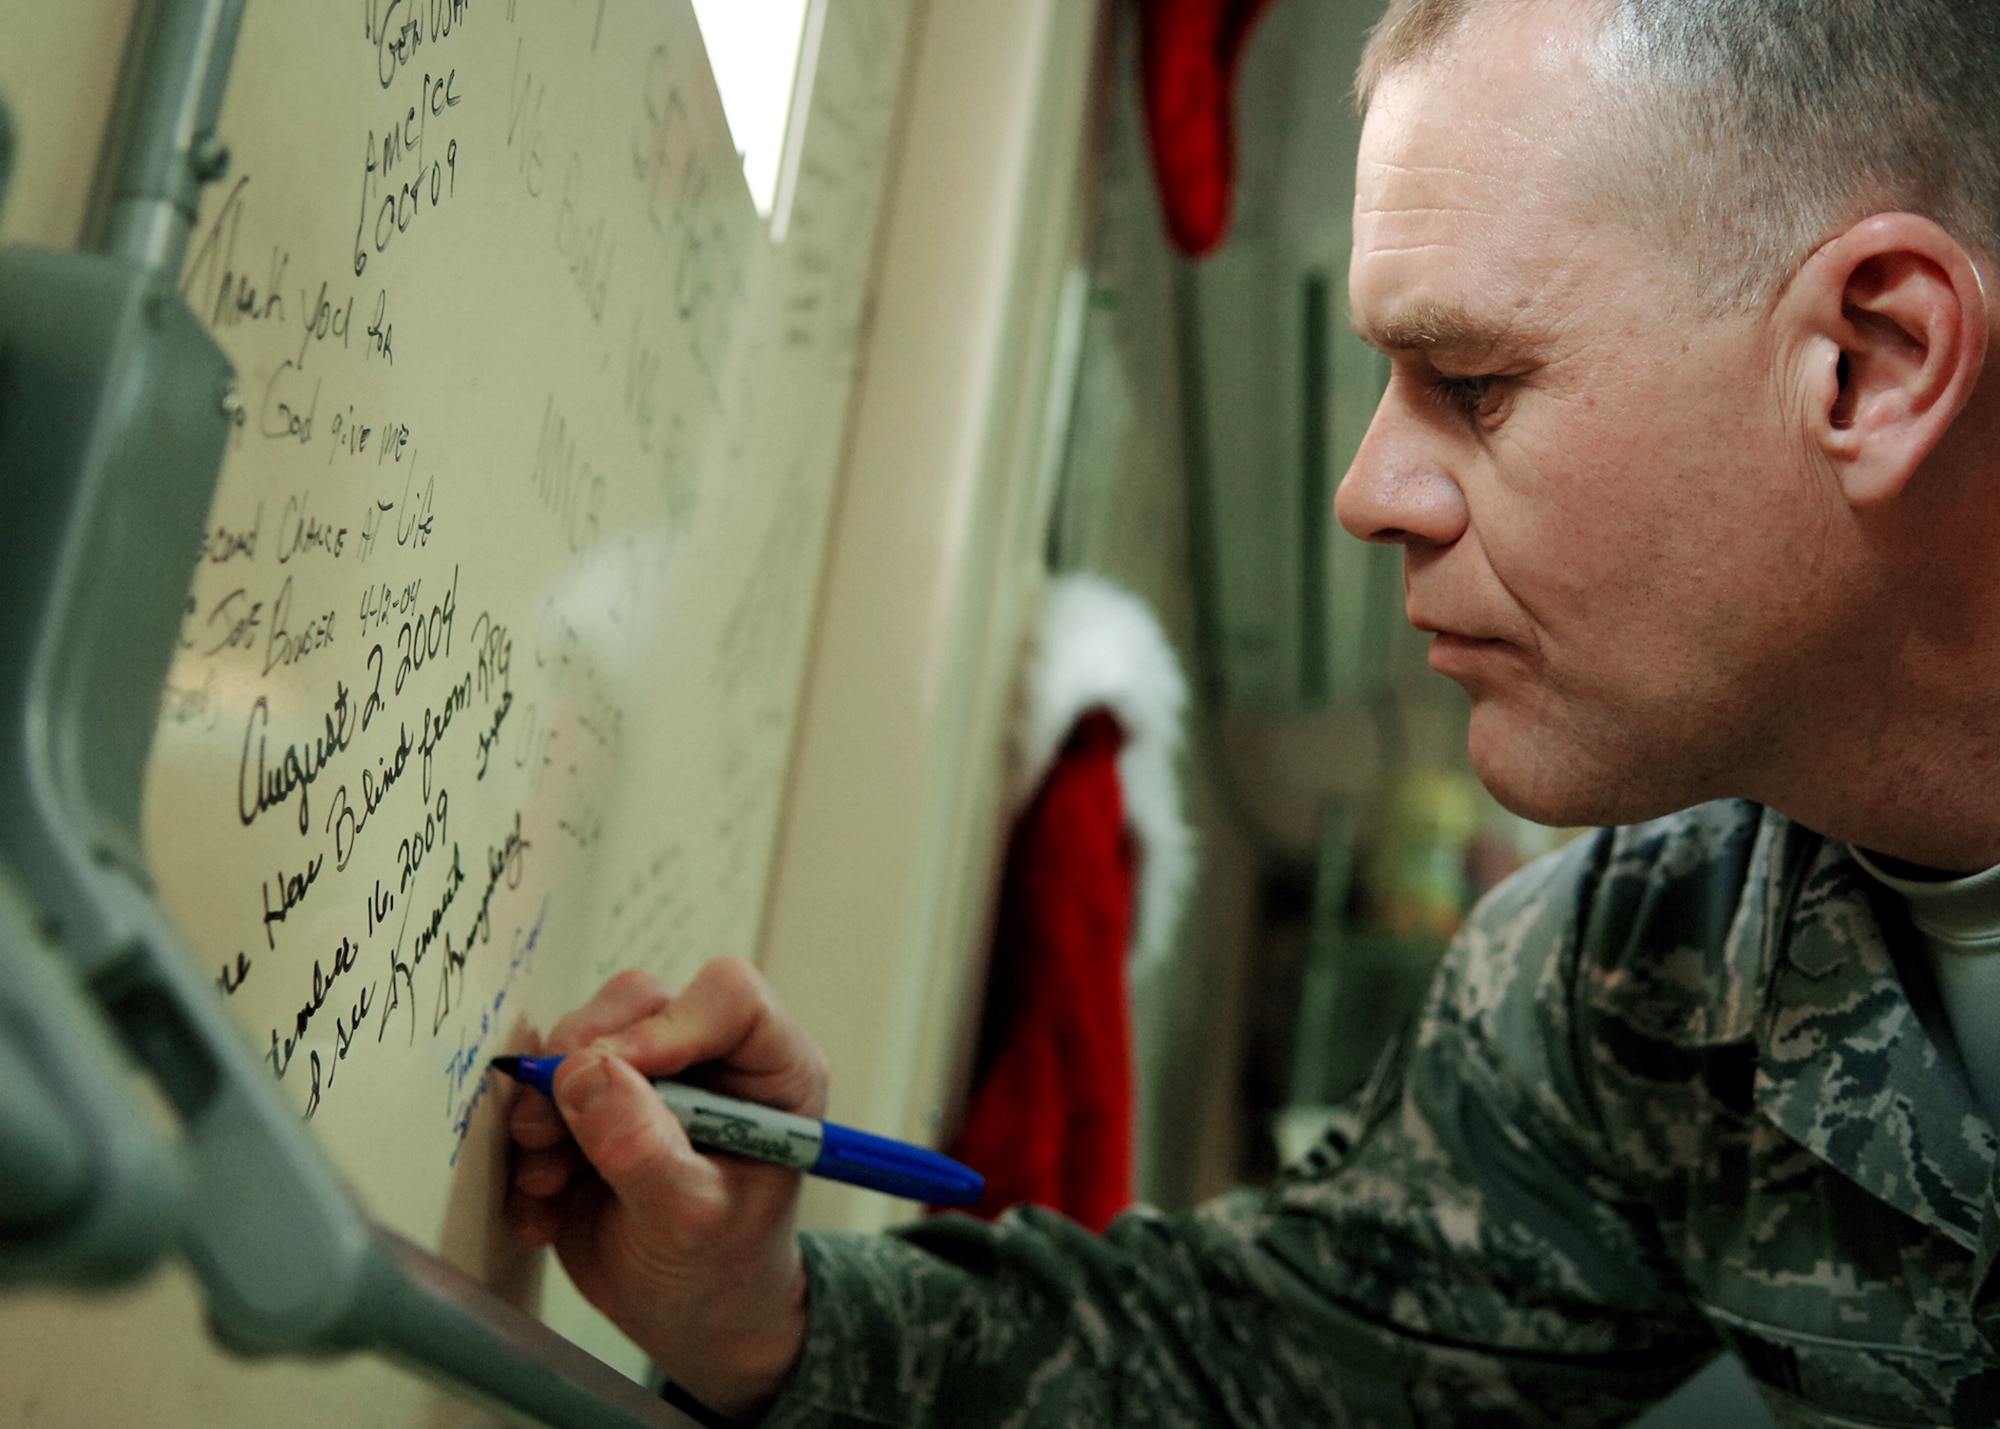 Chief Master Sgt. of the Air Force James A. Roy signs the warrior wall Dec. 4, 2009 at the Air Force Theater Hospital at Jooint Base Balad, Iraq. During his first visit to JB Balad as the chief master sergeant of the Air Force, Chief Roy toured various locations on the base and mentored Airmen during an Airman's call. (U.S. Air Force photo/Senior Airman Christopher Hubenthal)